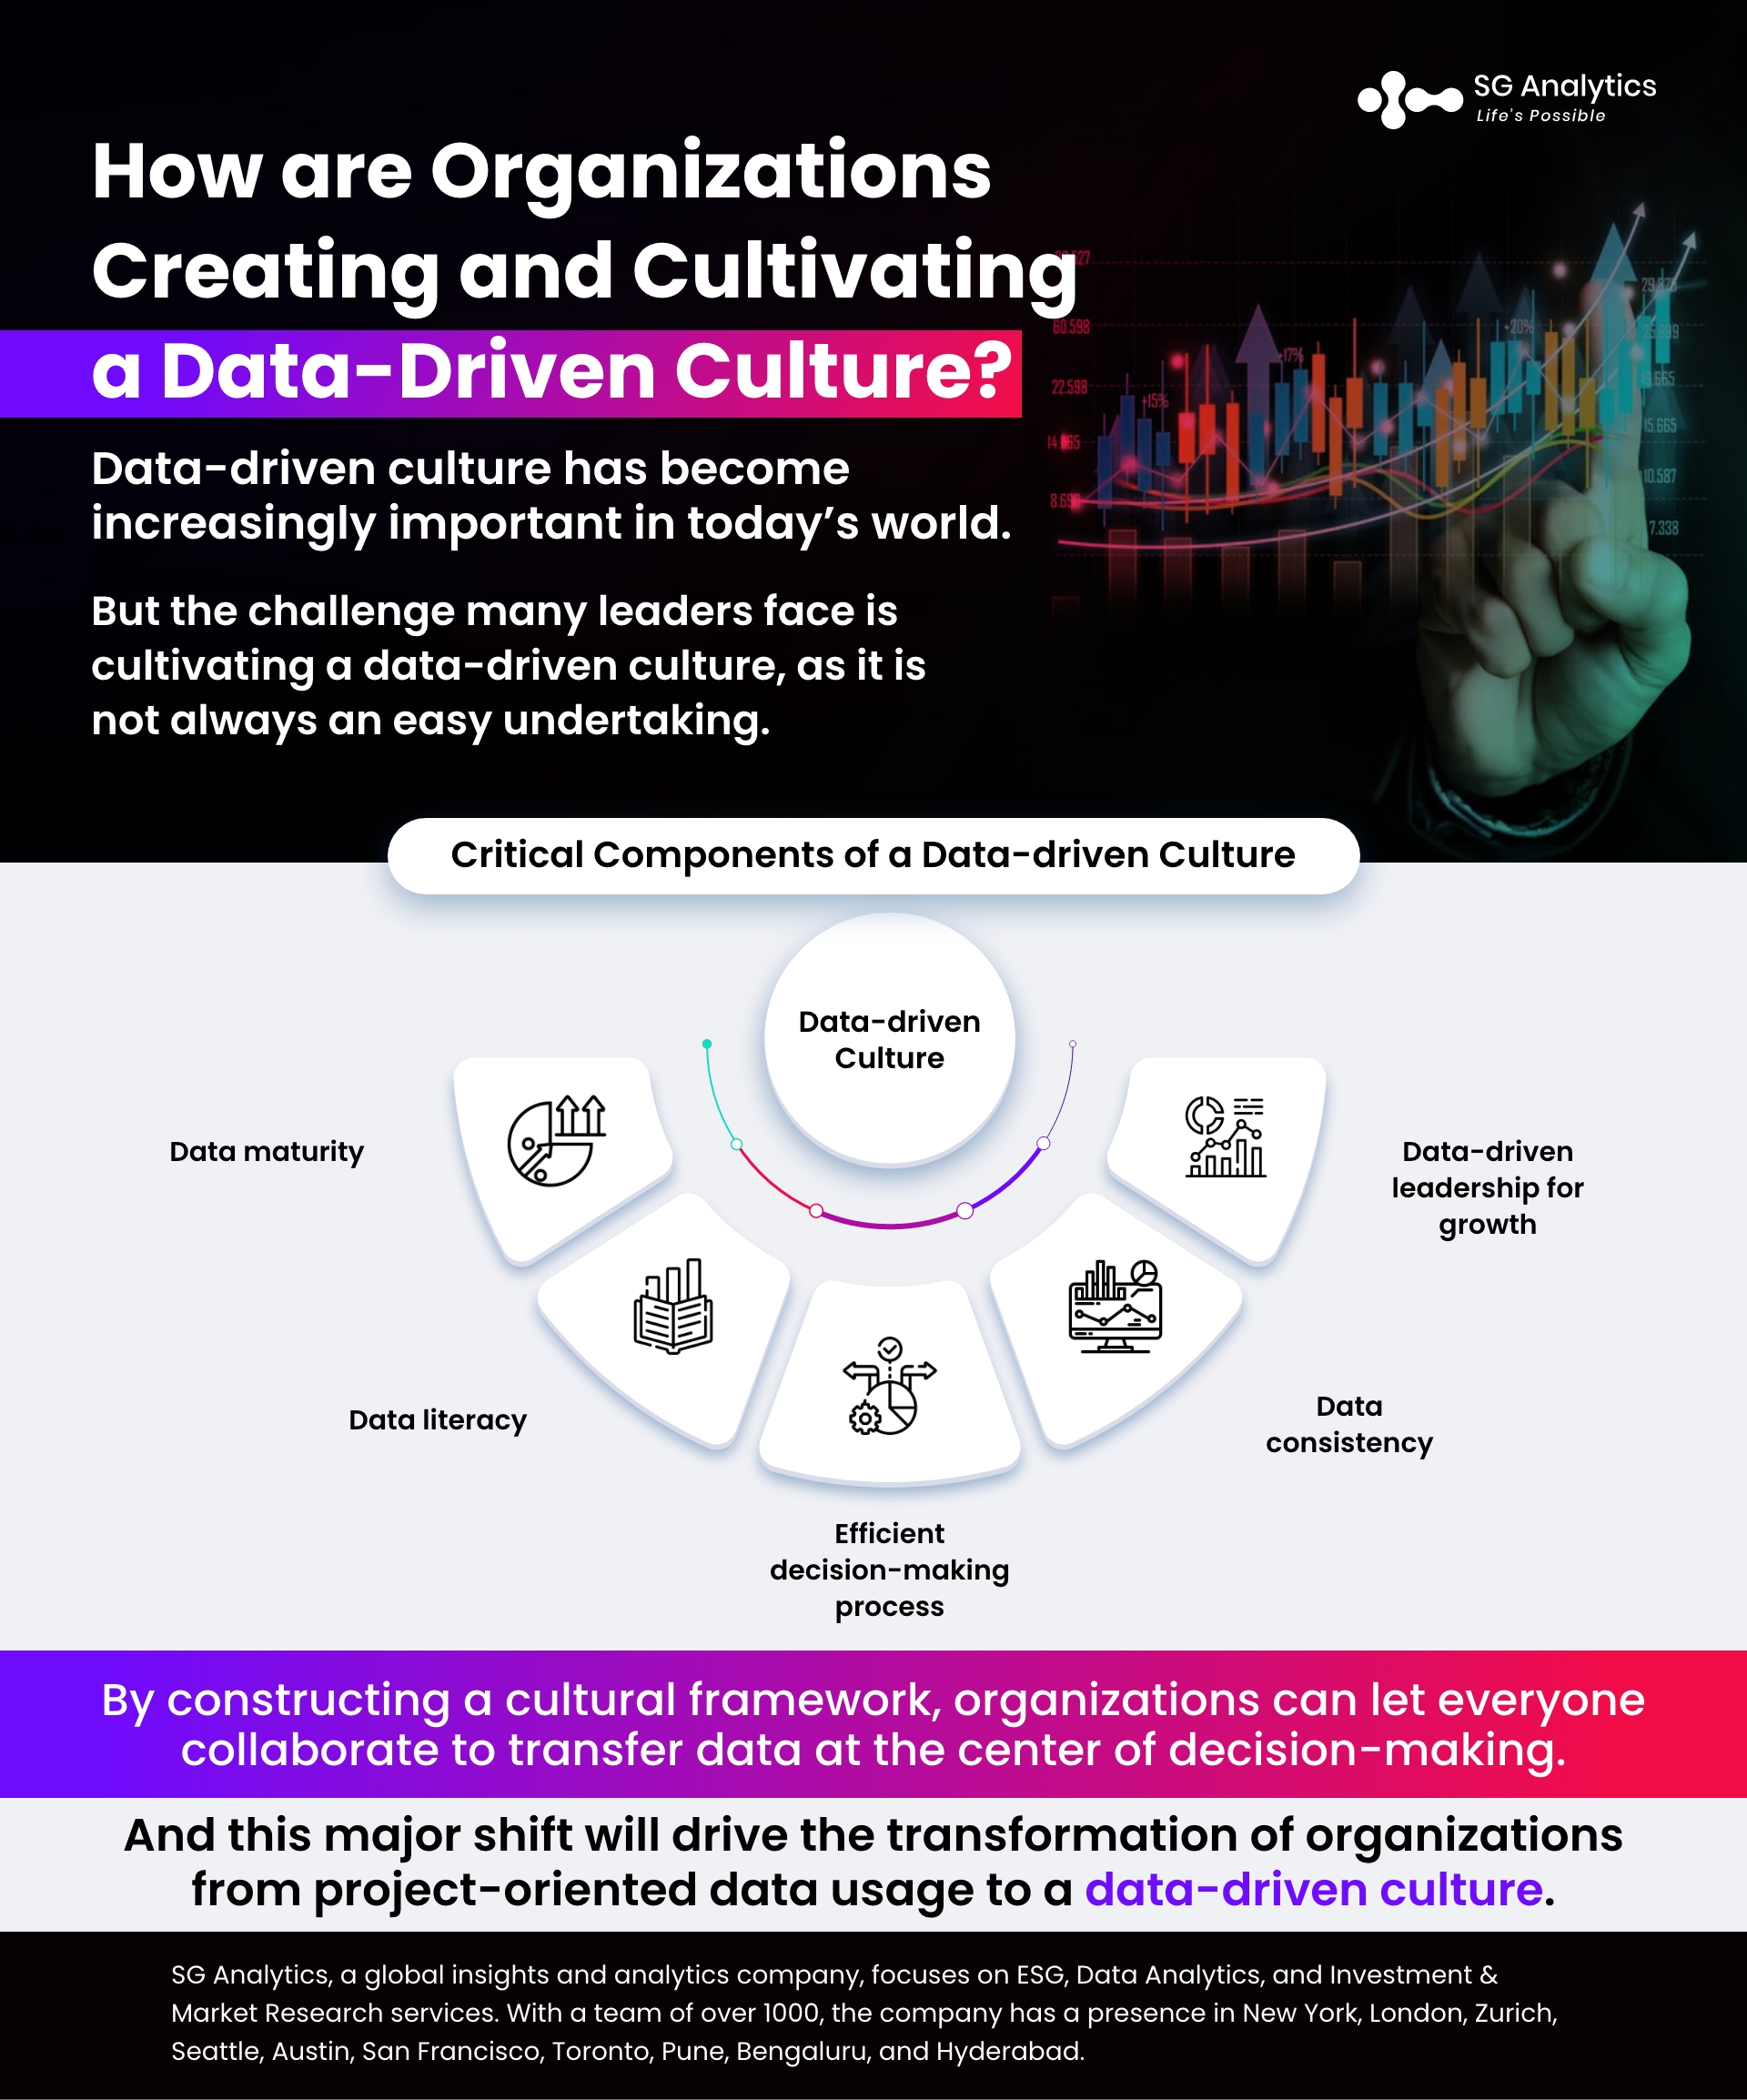 How are Organizations Creating and Cultivating a Data-Driven Culture?